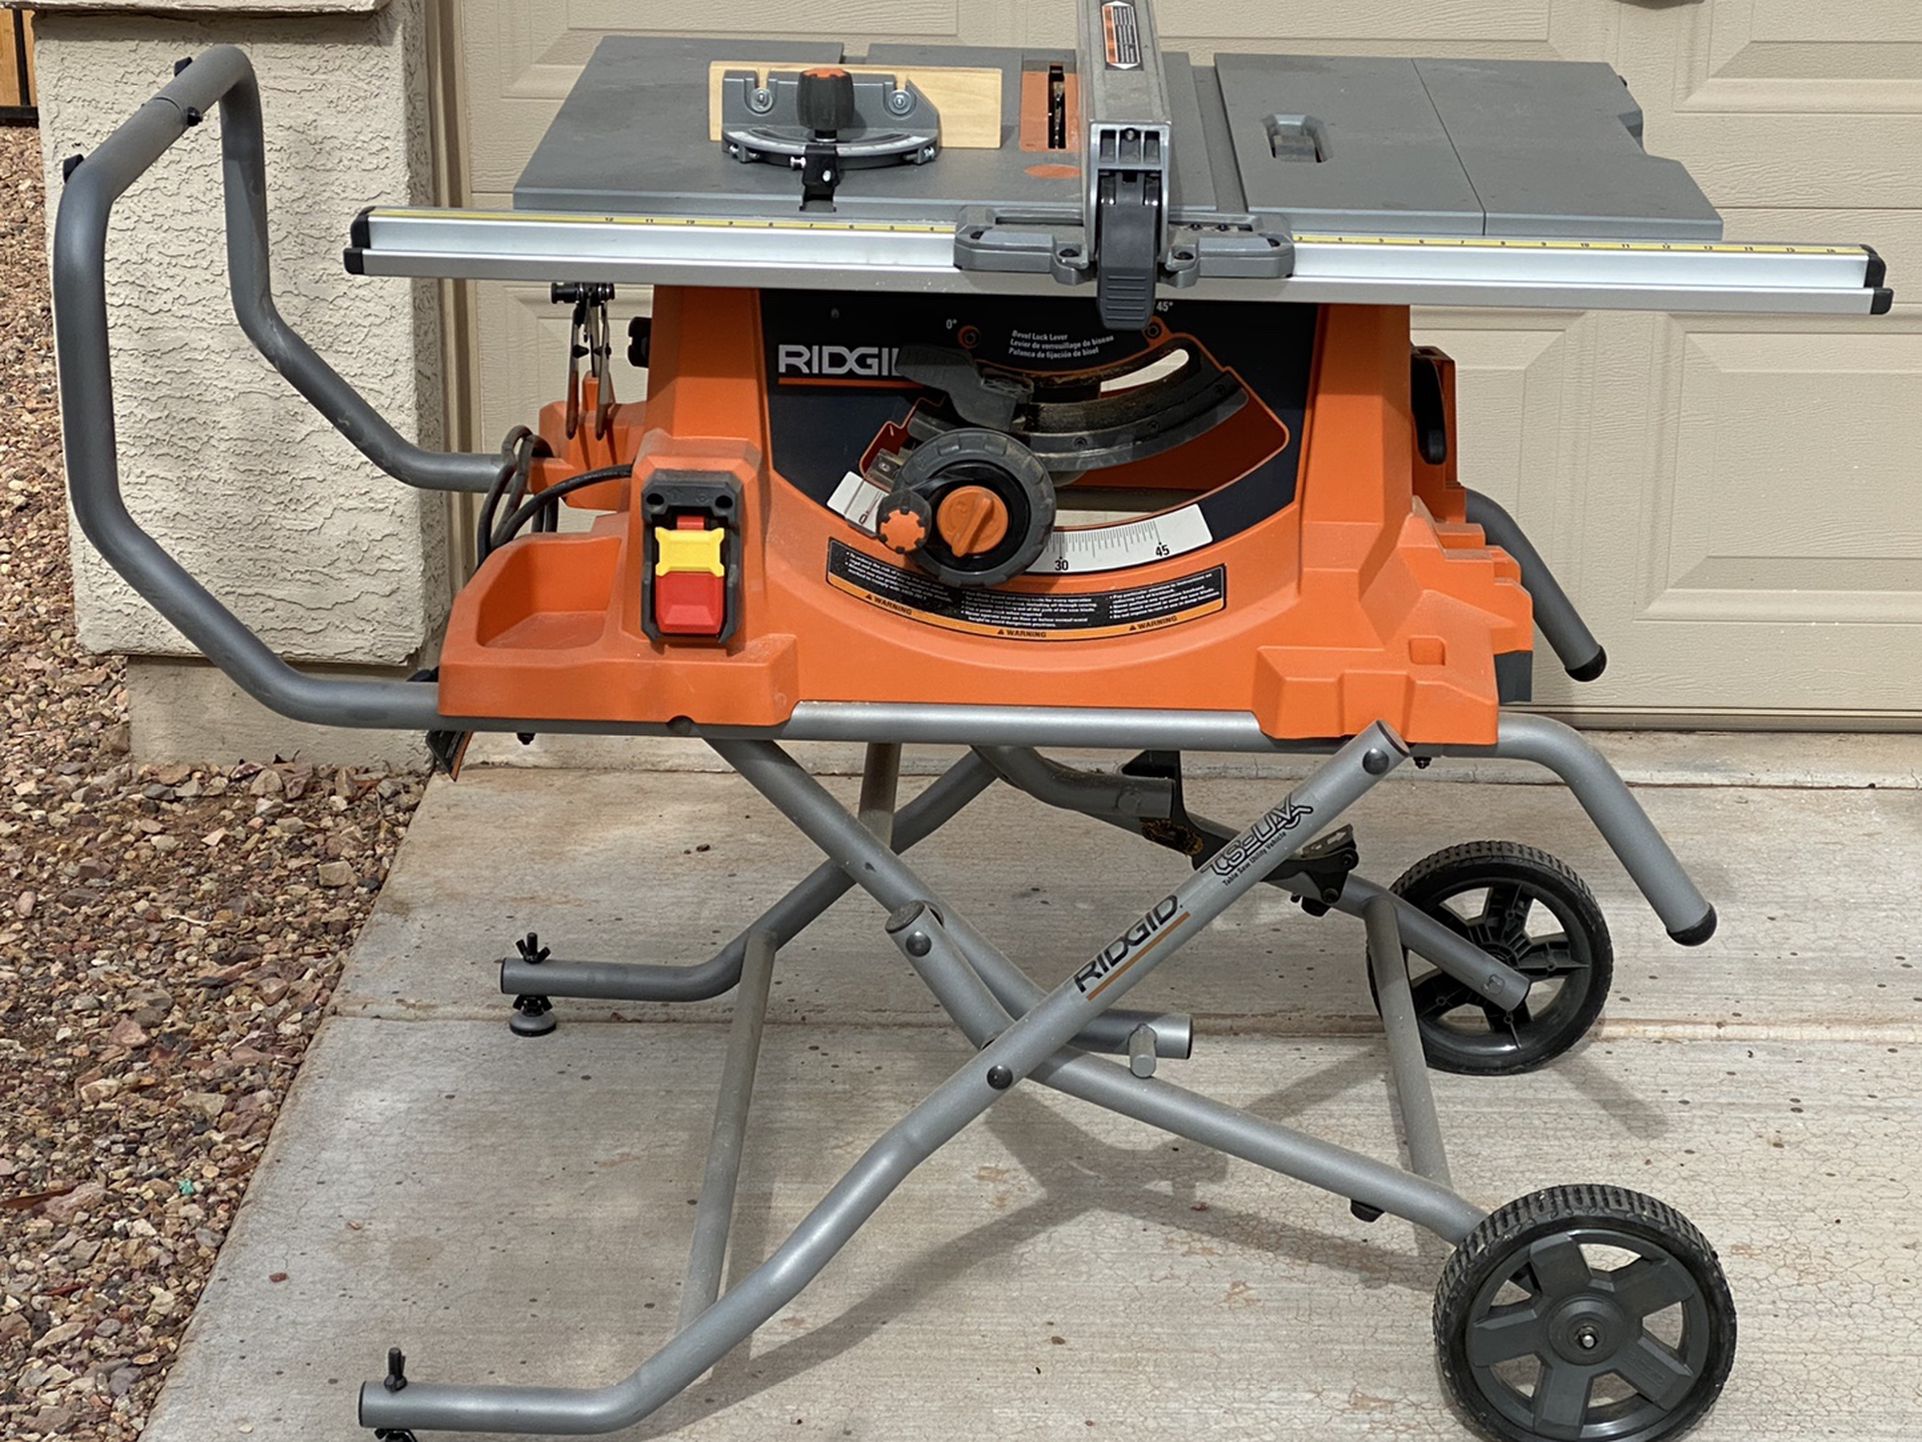 Rigid 10in Pro Jobsite Table Saw with Stand